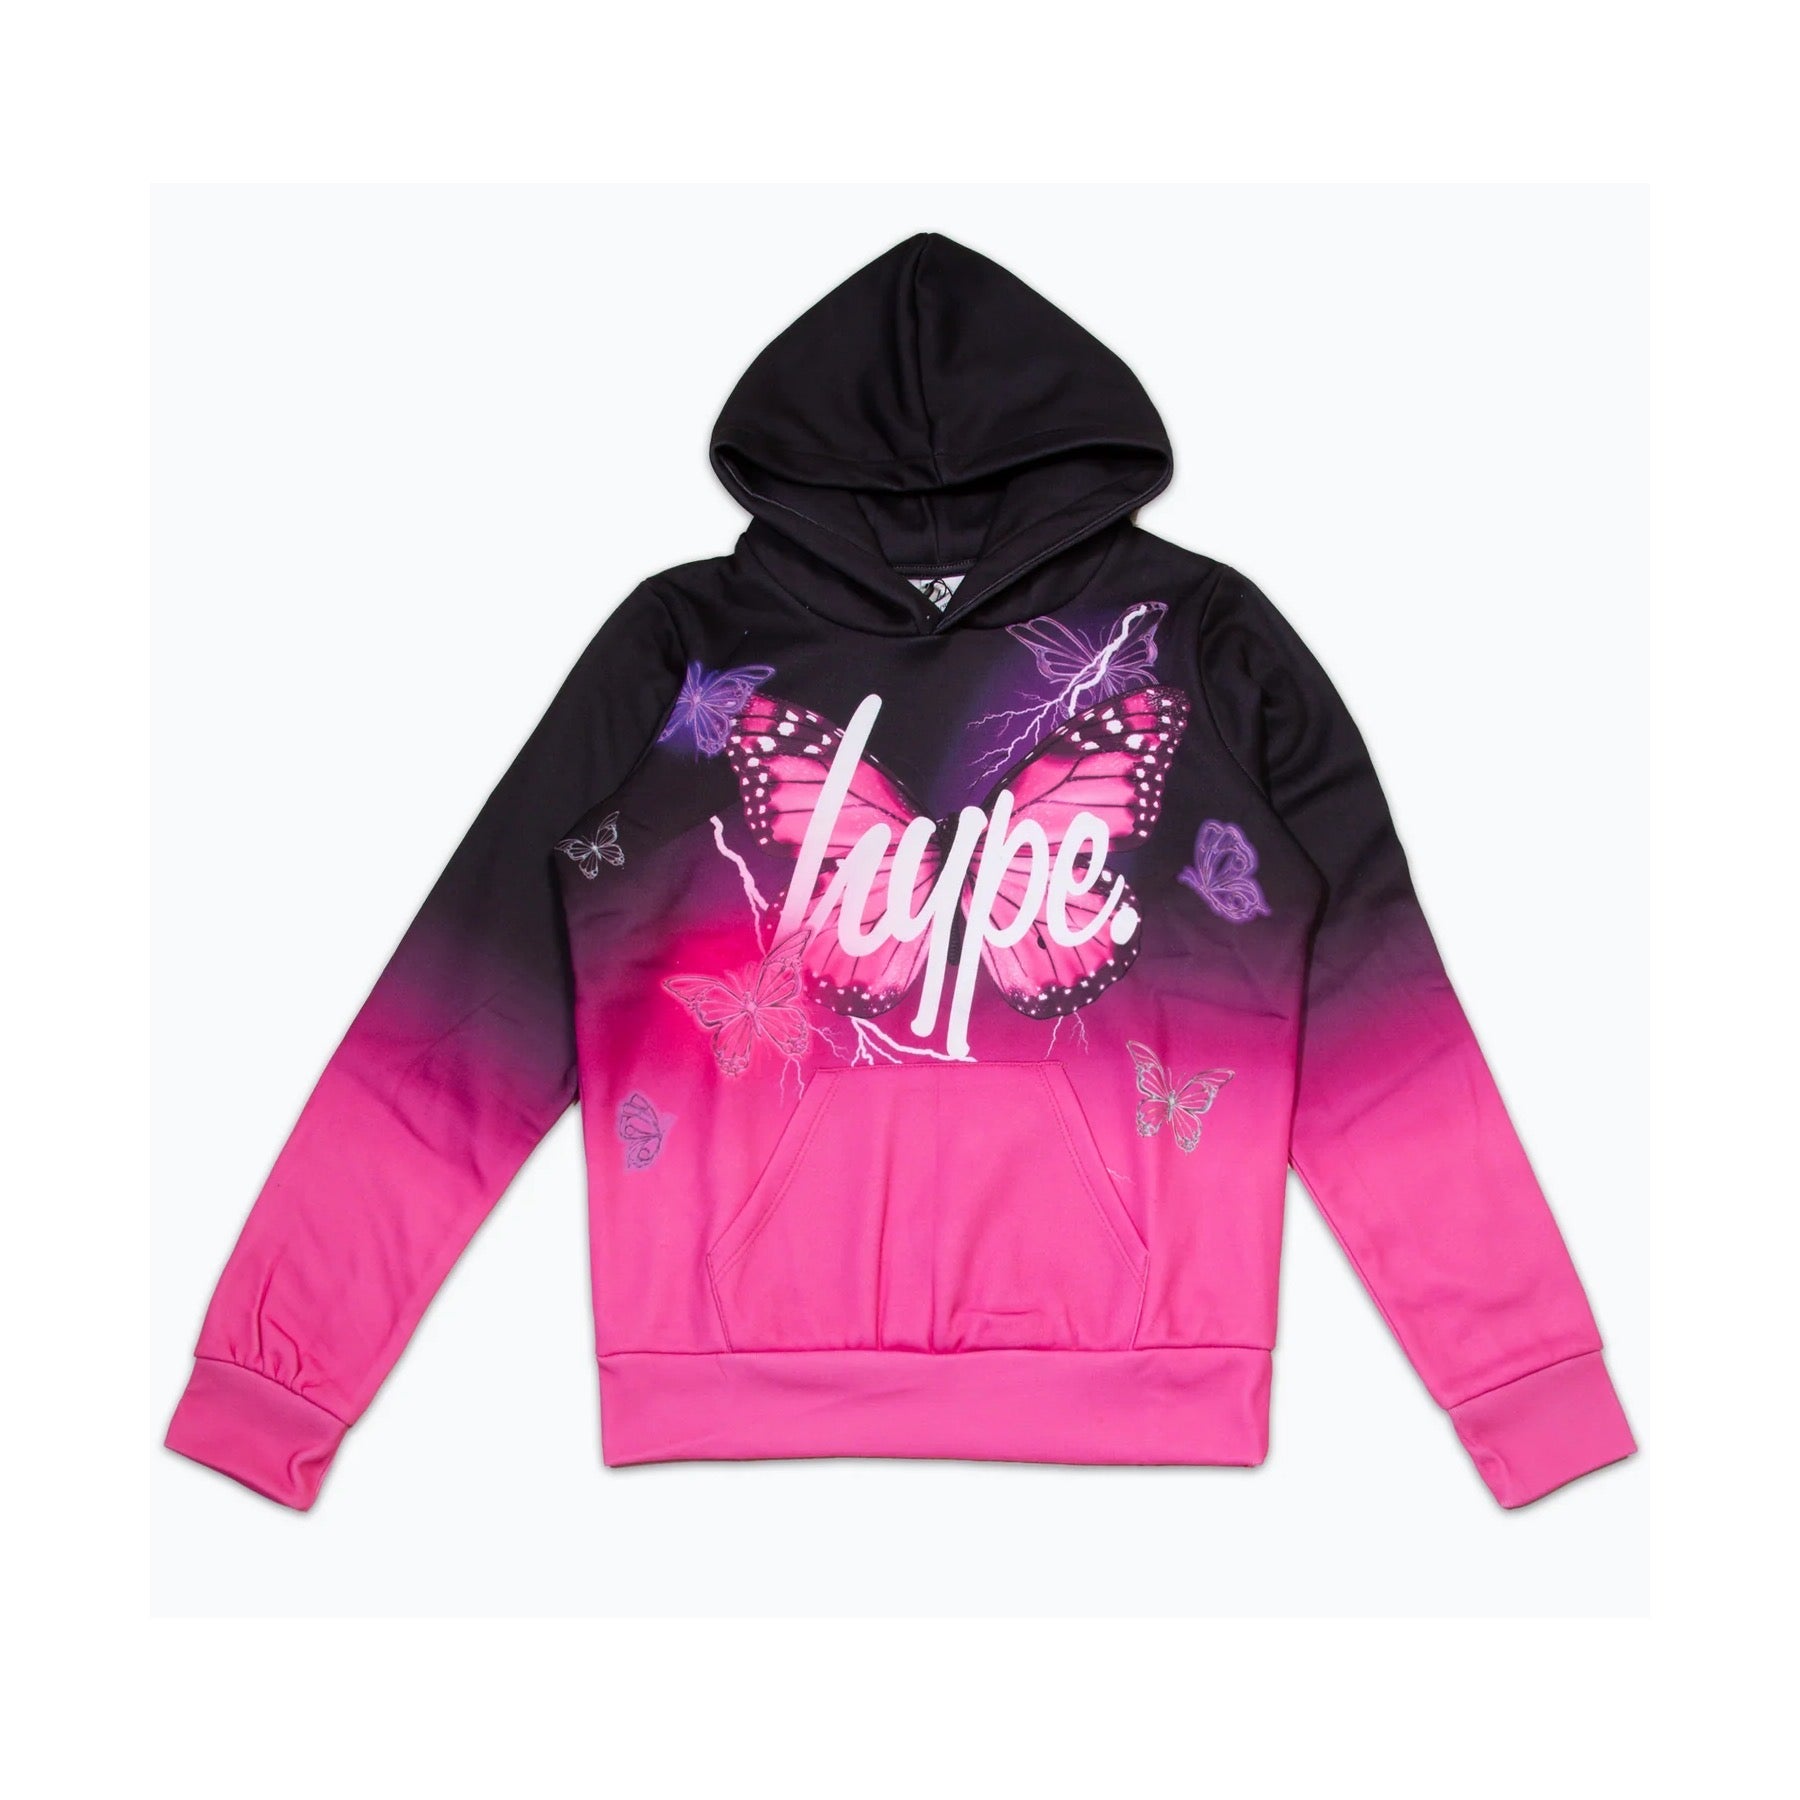 Hype Black Fade Butterfly Hoodie Yuao-096 Clothing 9/10YRS / Black,11/12YRS / Black,13YRS / Black,14YRS / Black